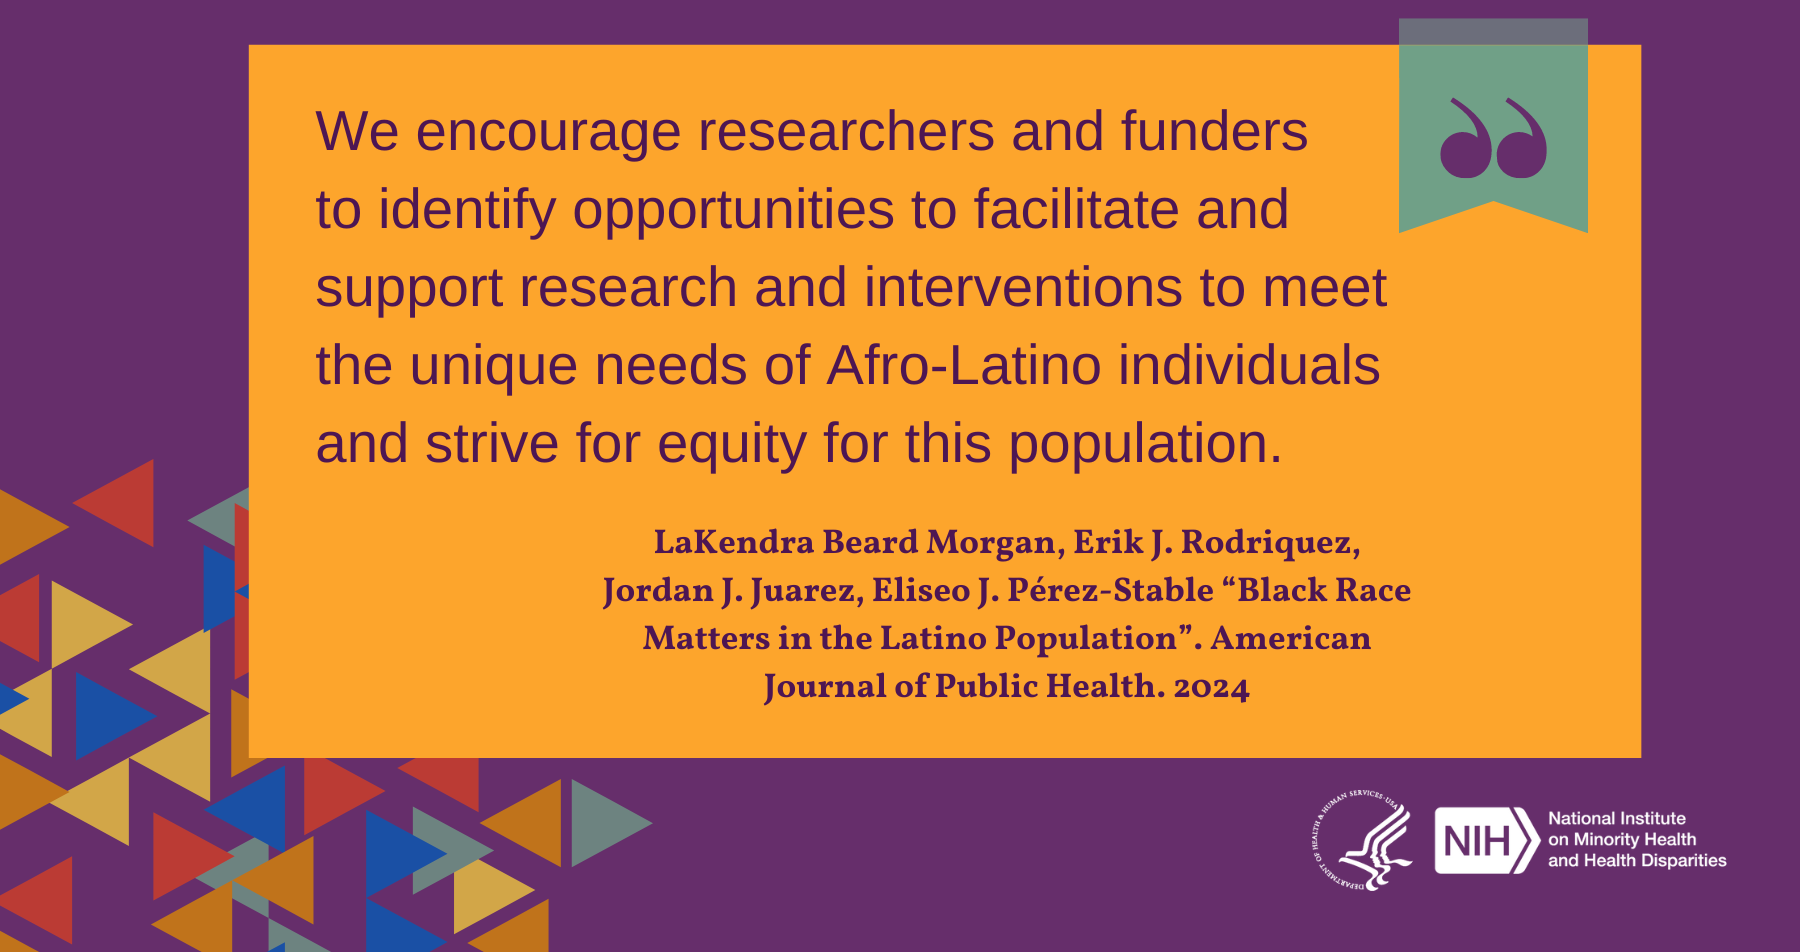 Authors’ quote: We encourage researchers and funders to identify opportunities to facilitate and support research and interventions to meet the unique needs of Afro-Latino individuals and strive for equity for this population.